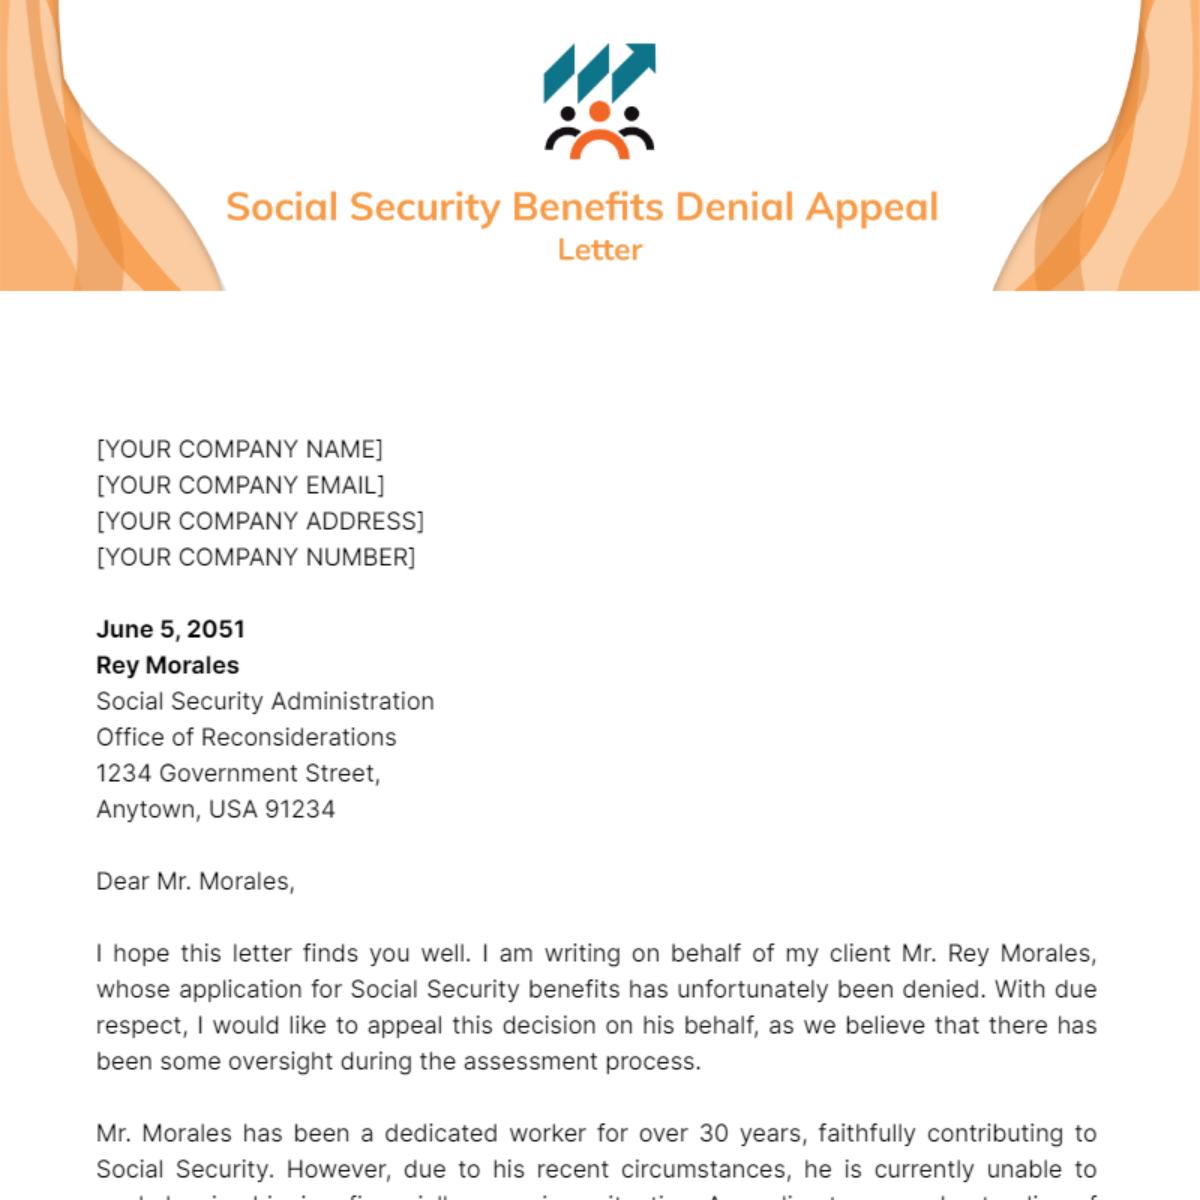 Social Security Benefits Denial Appeal Letter Template